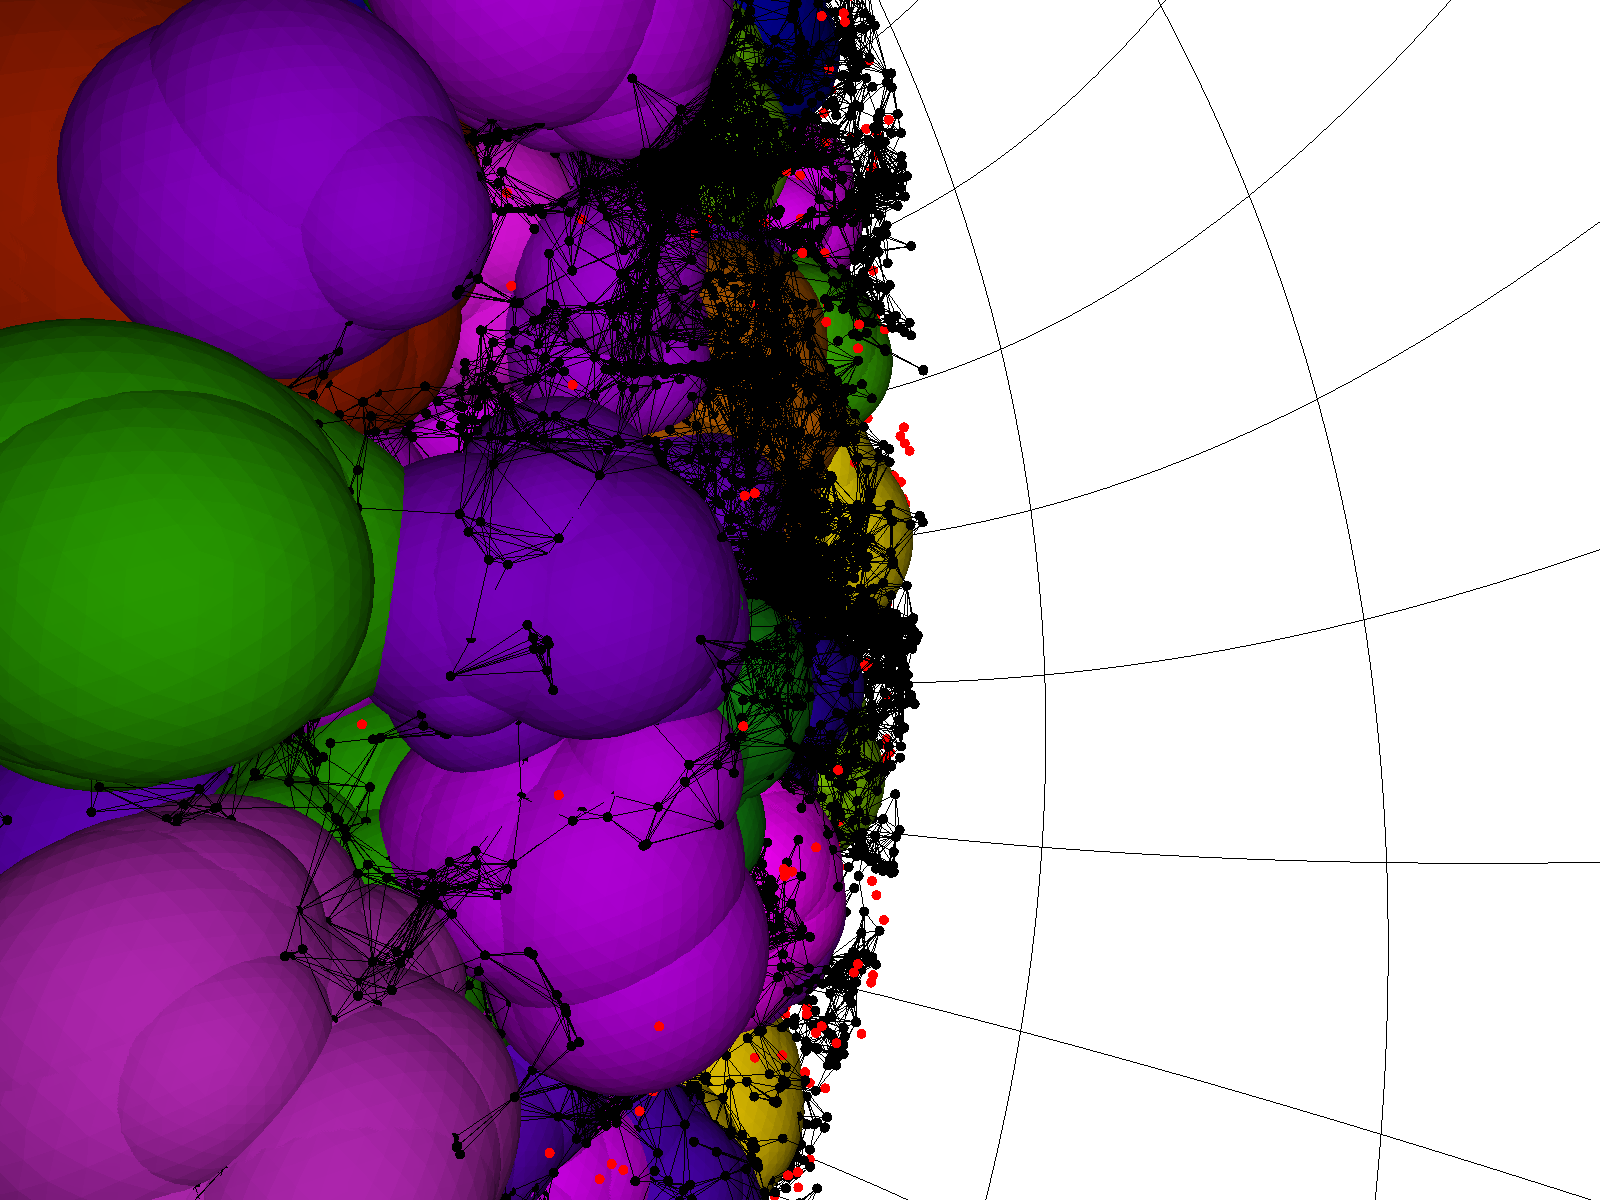 VoidFinder visualization of the output from SDSS DR7 with VoidRender